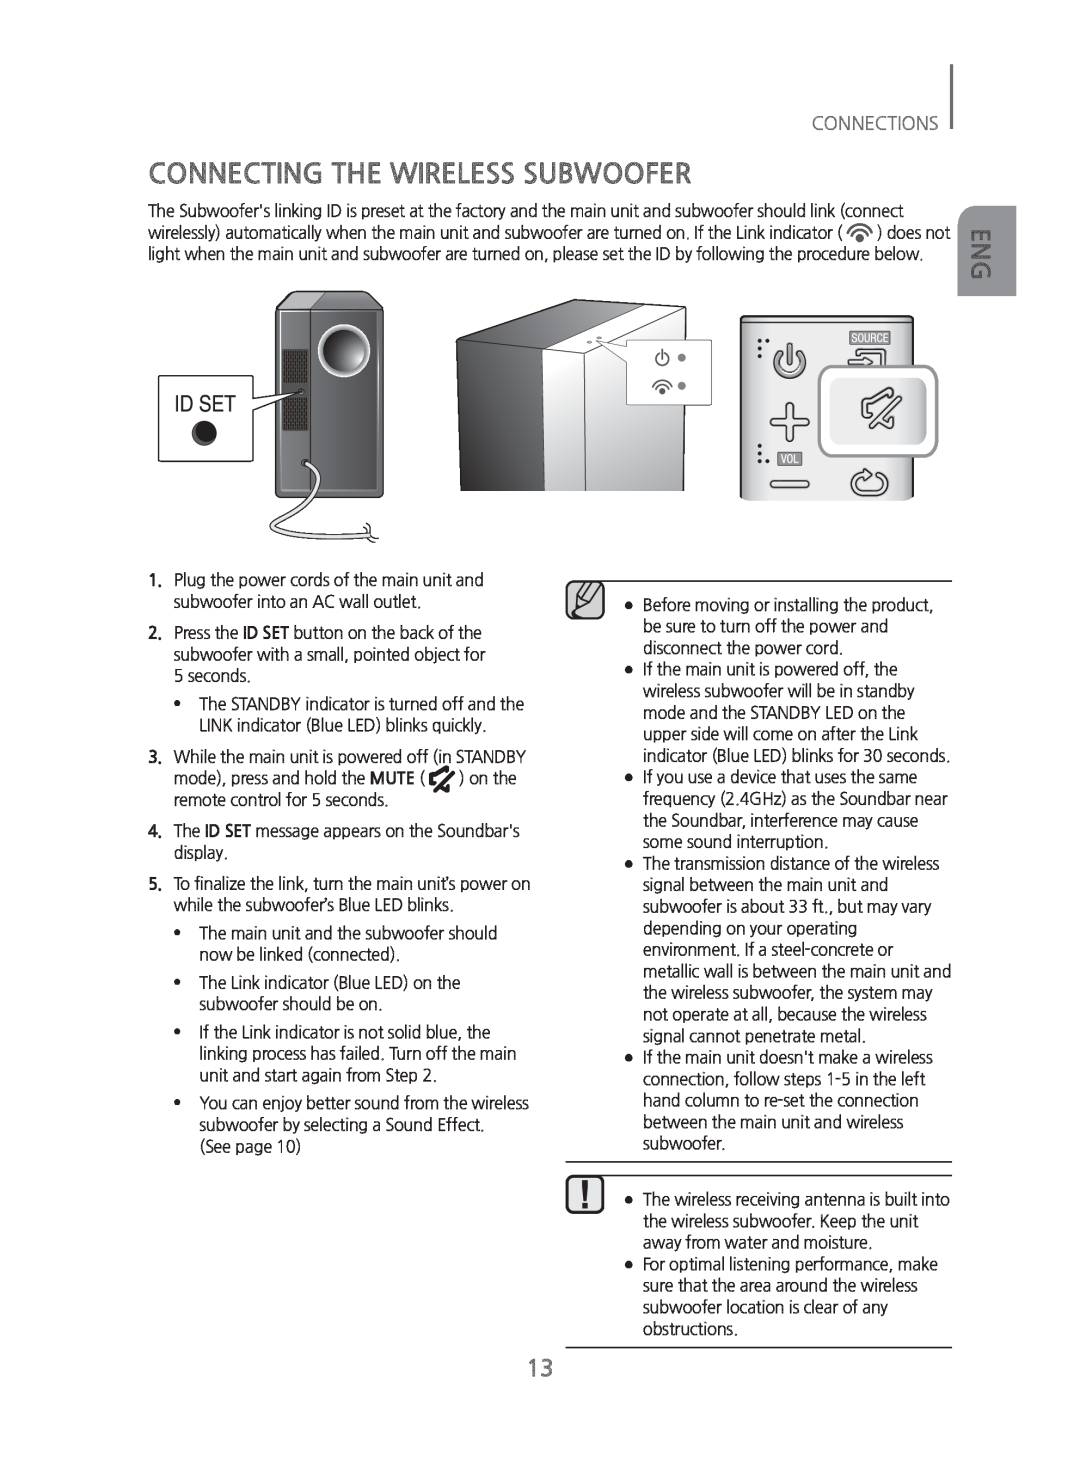 Samsung HW-H450/ZA manual Connecting The Wireless Subwoofer, Connections 